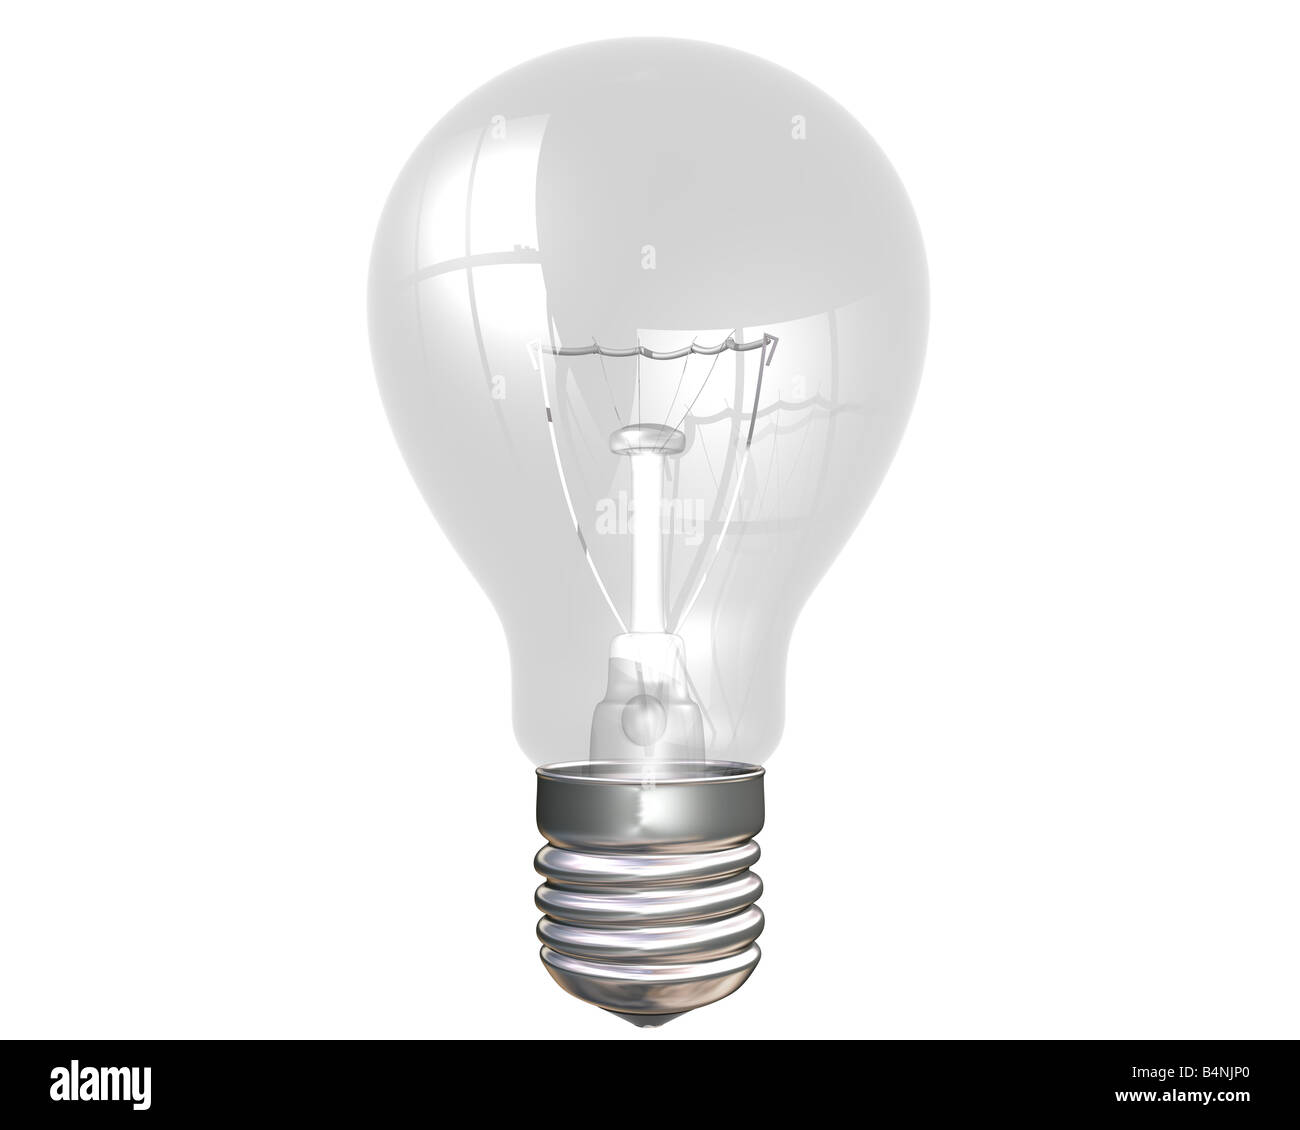 Isolated illustration of an everyday light bulb Stock Photo